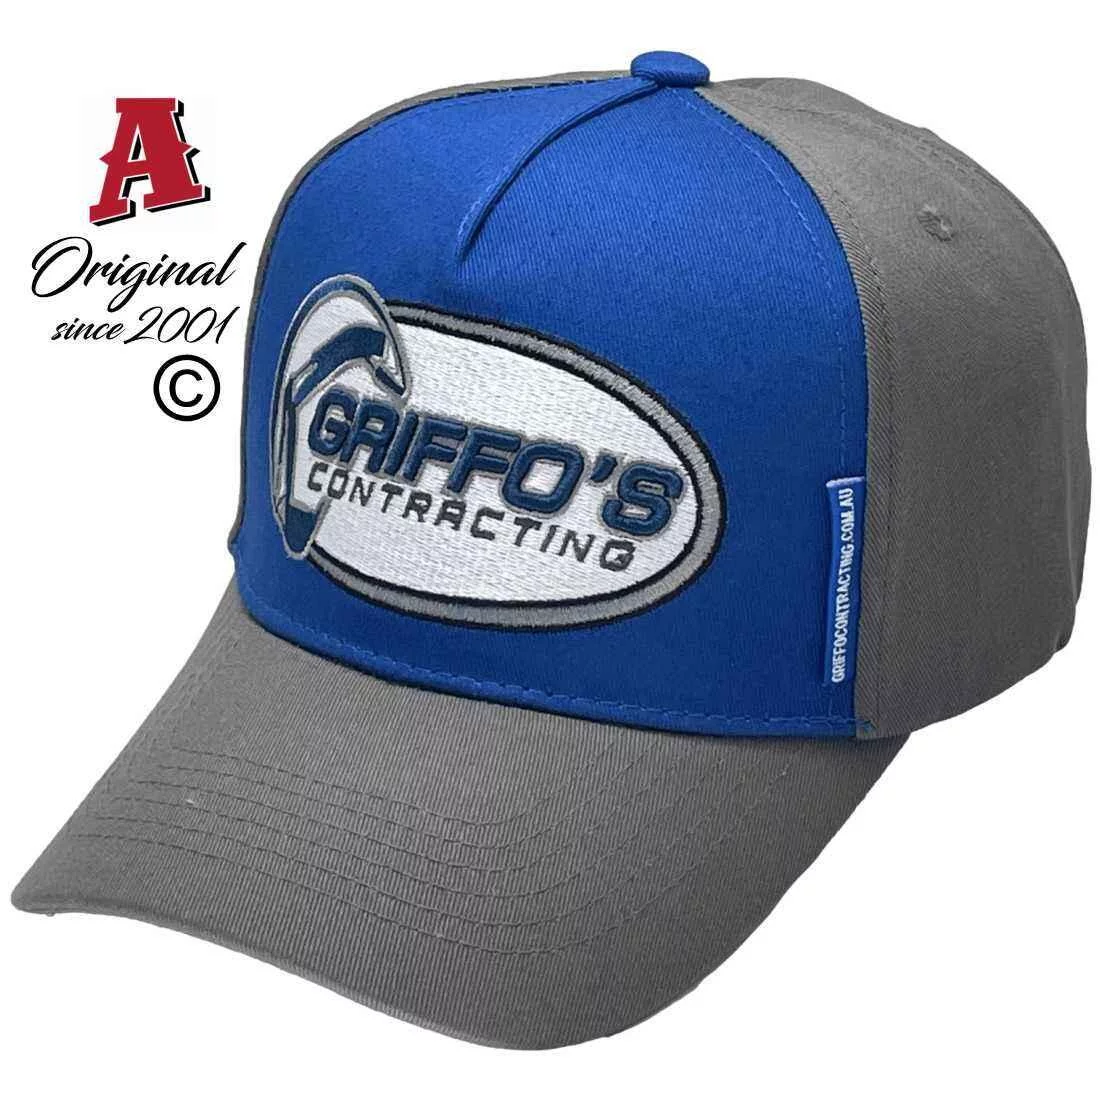 Griffo's Contracting Byfield Qld Aussie Snapback Baseball Caps with Australian HeadFit Crown Charcoal Royal Blue